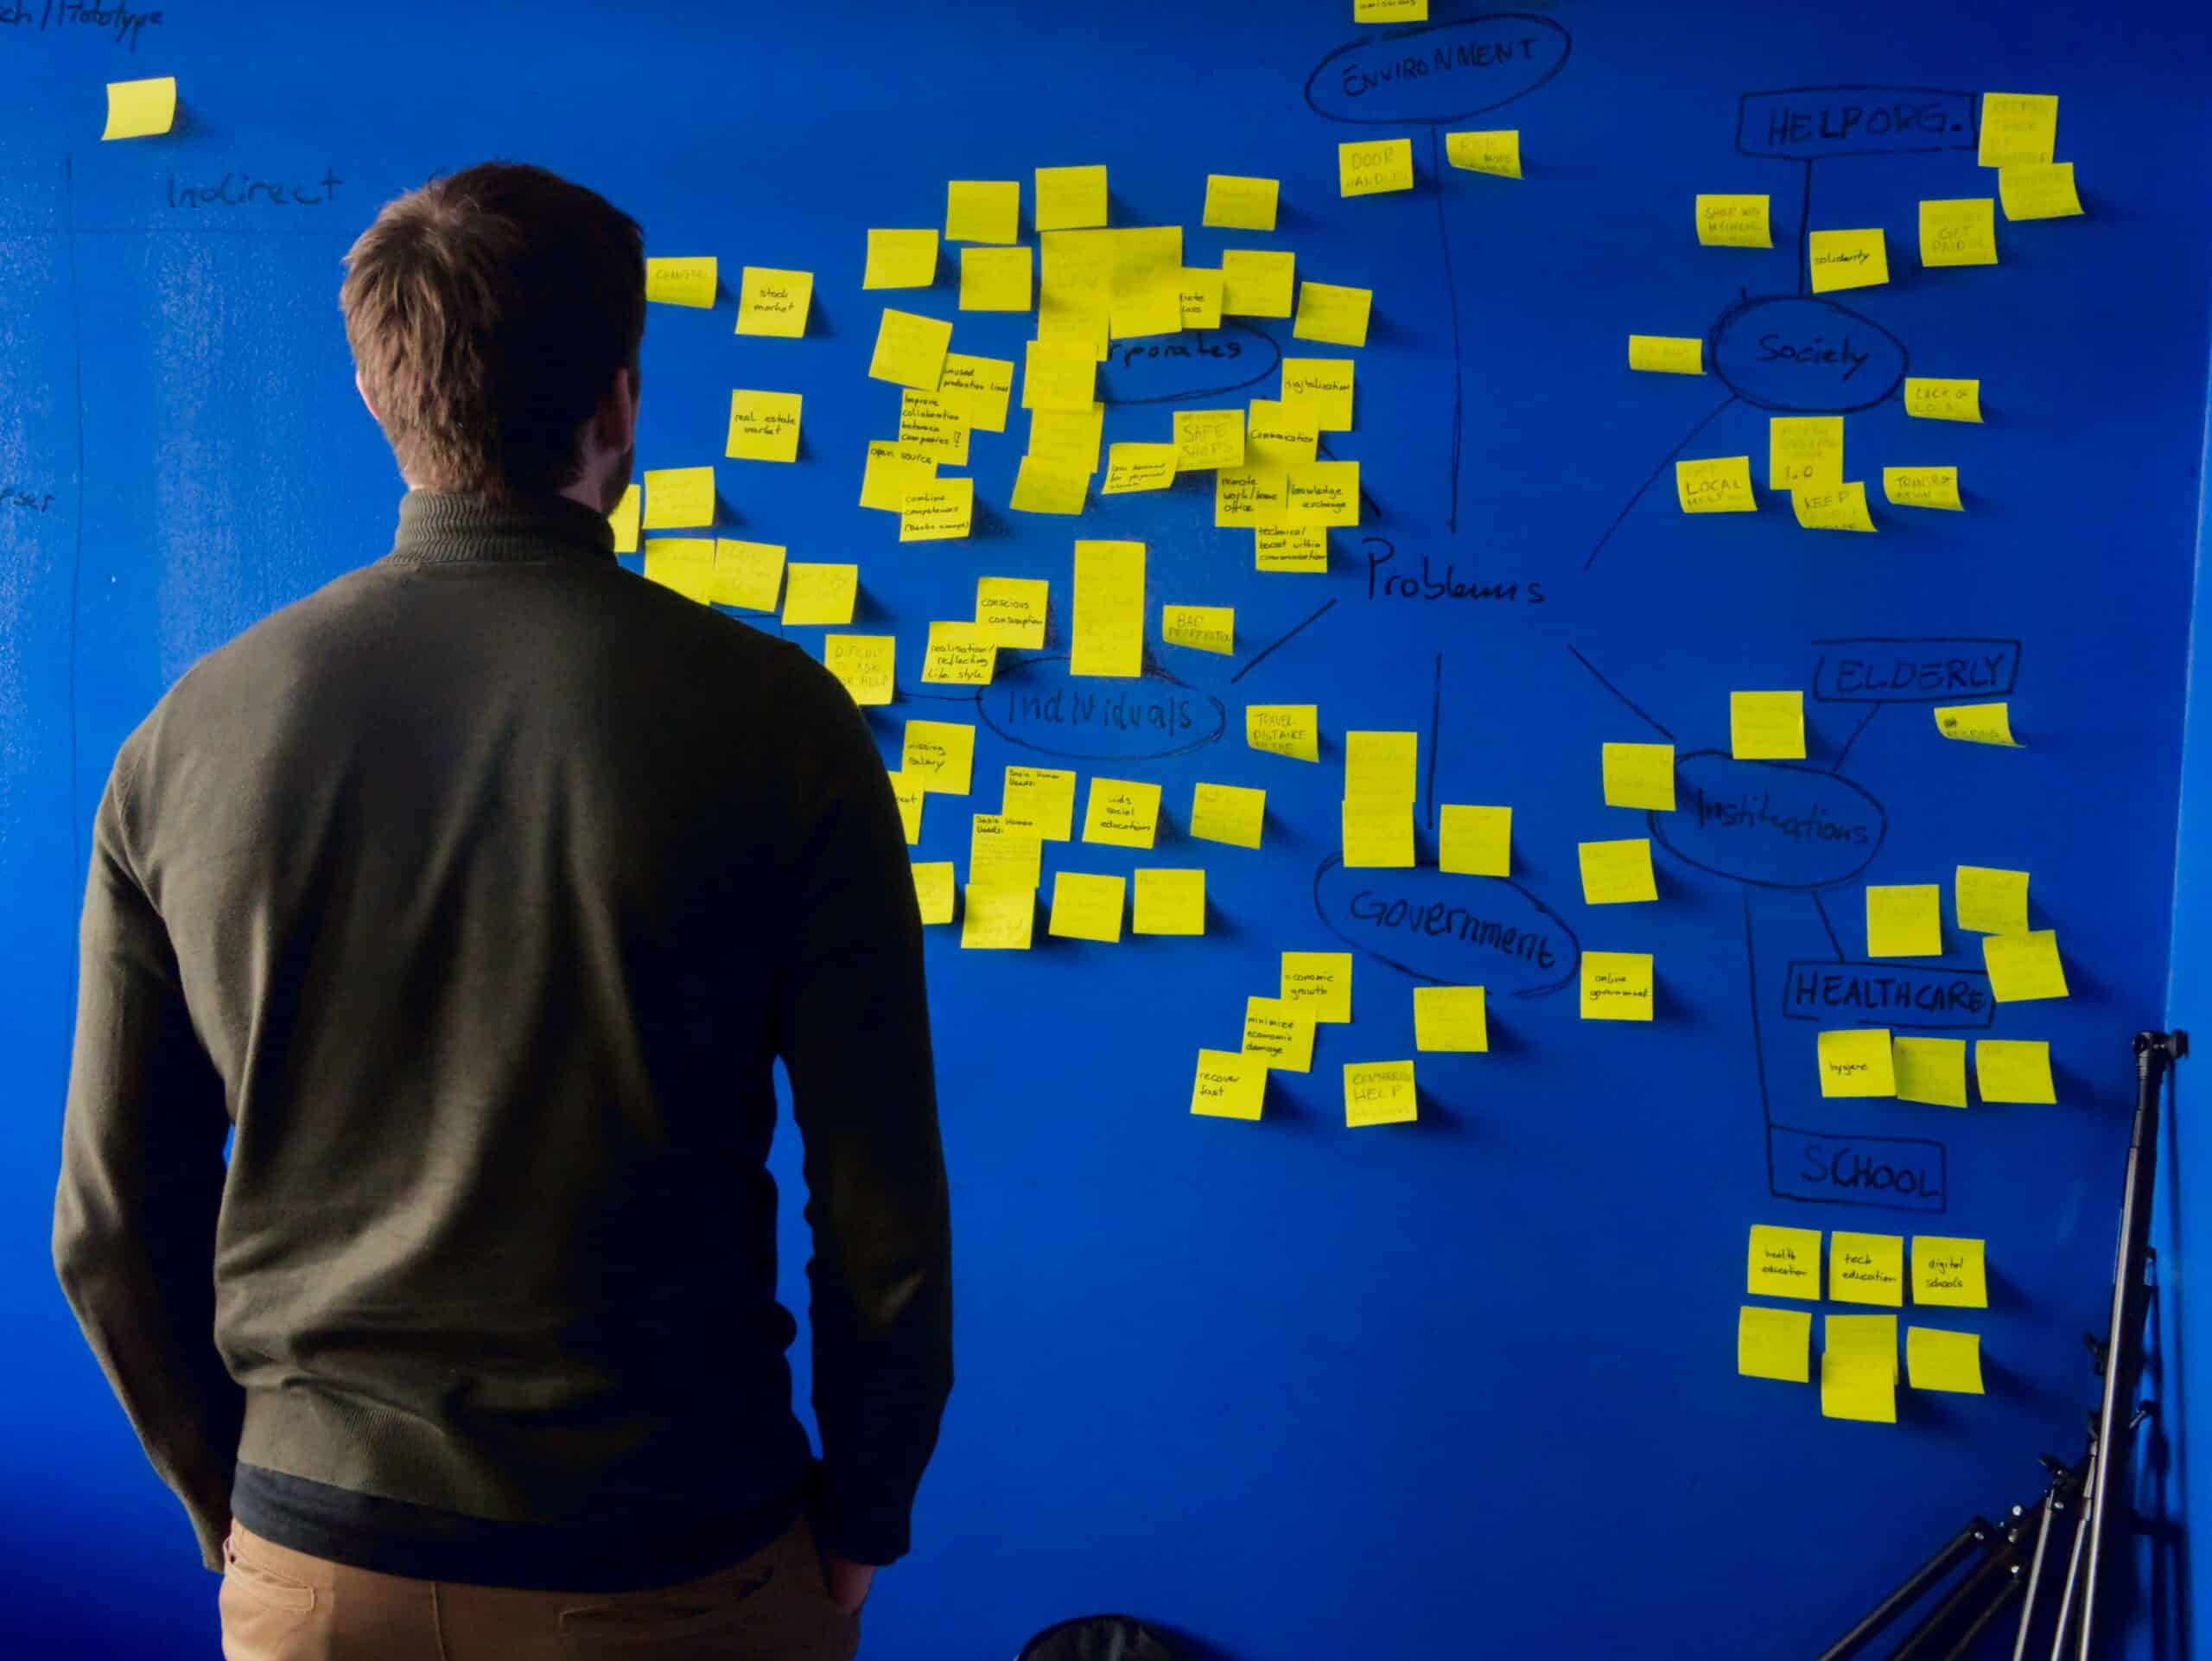 Man looking at a blue wall with yellow post-it notes on it.